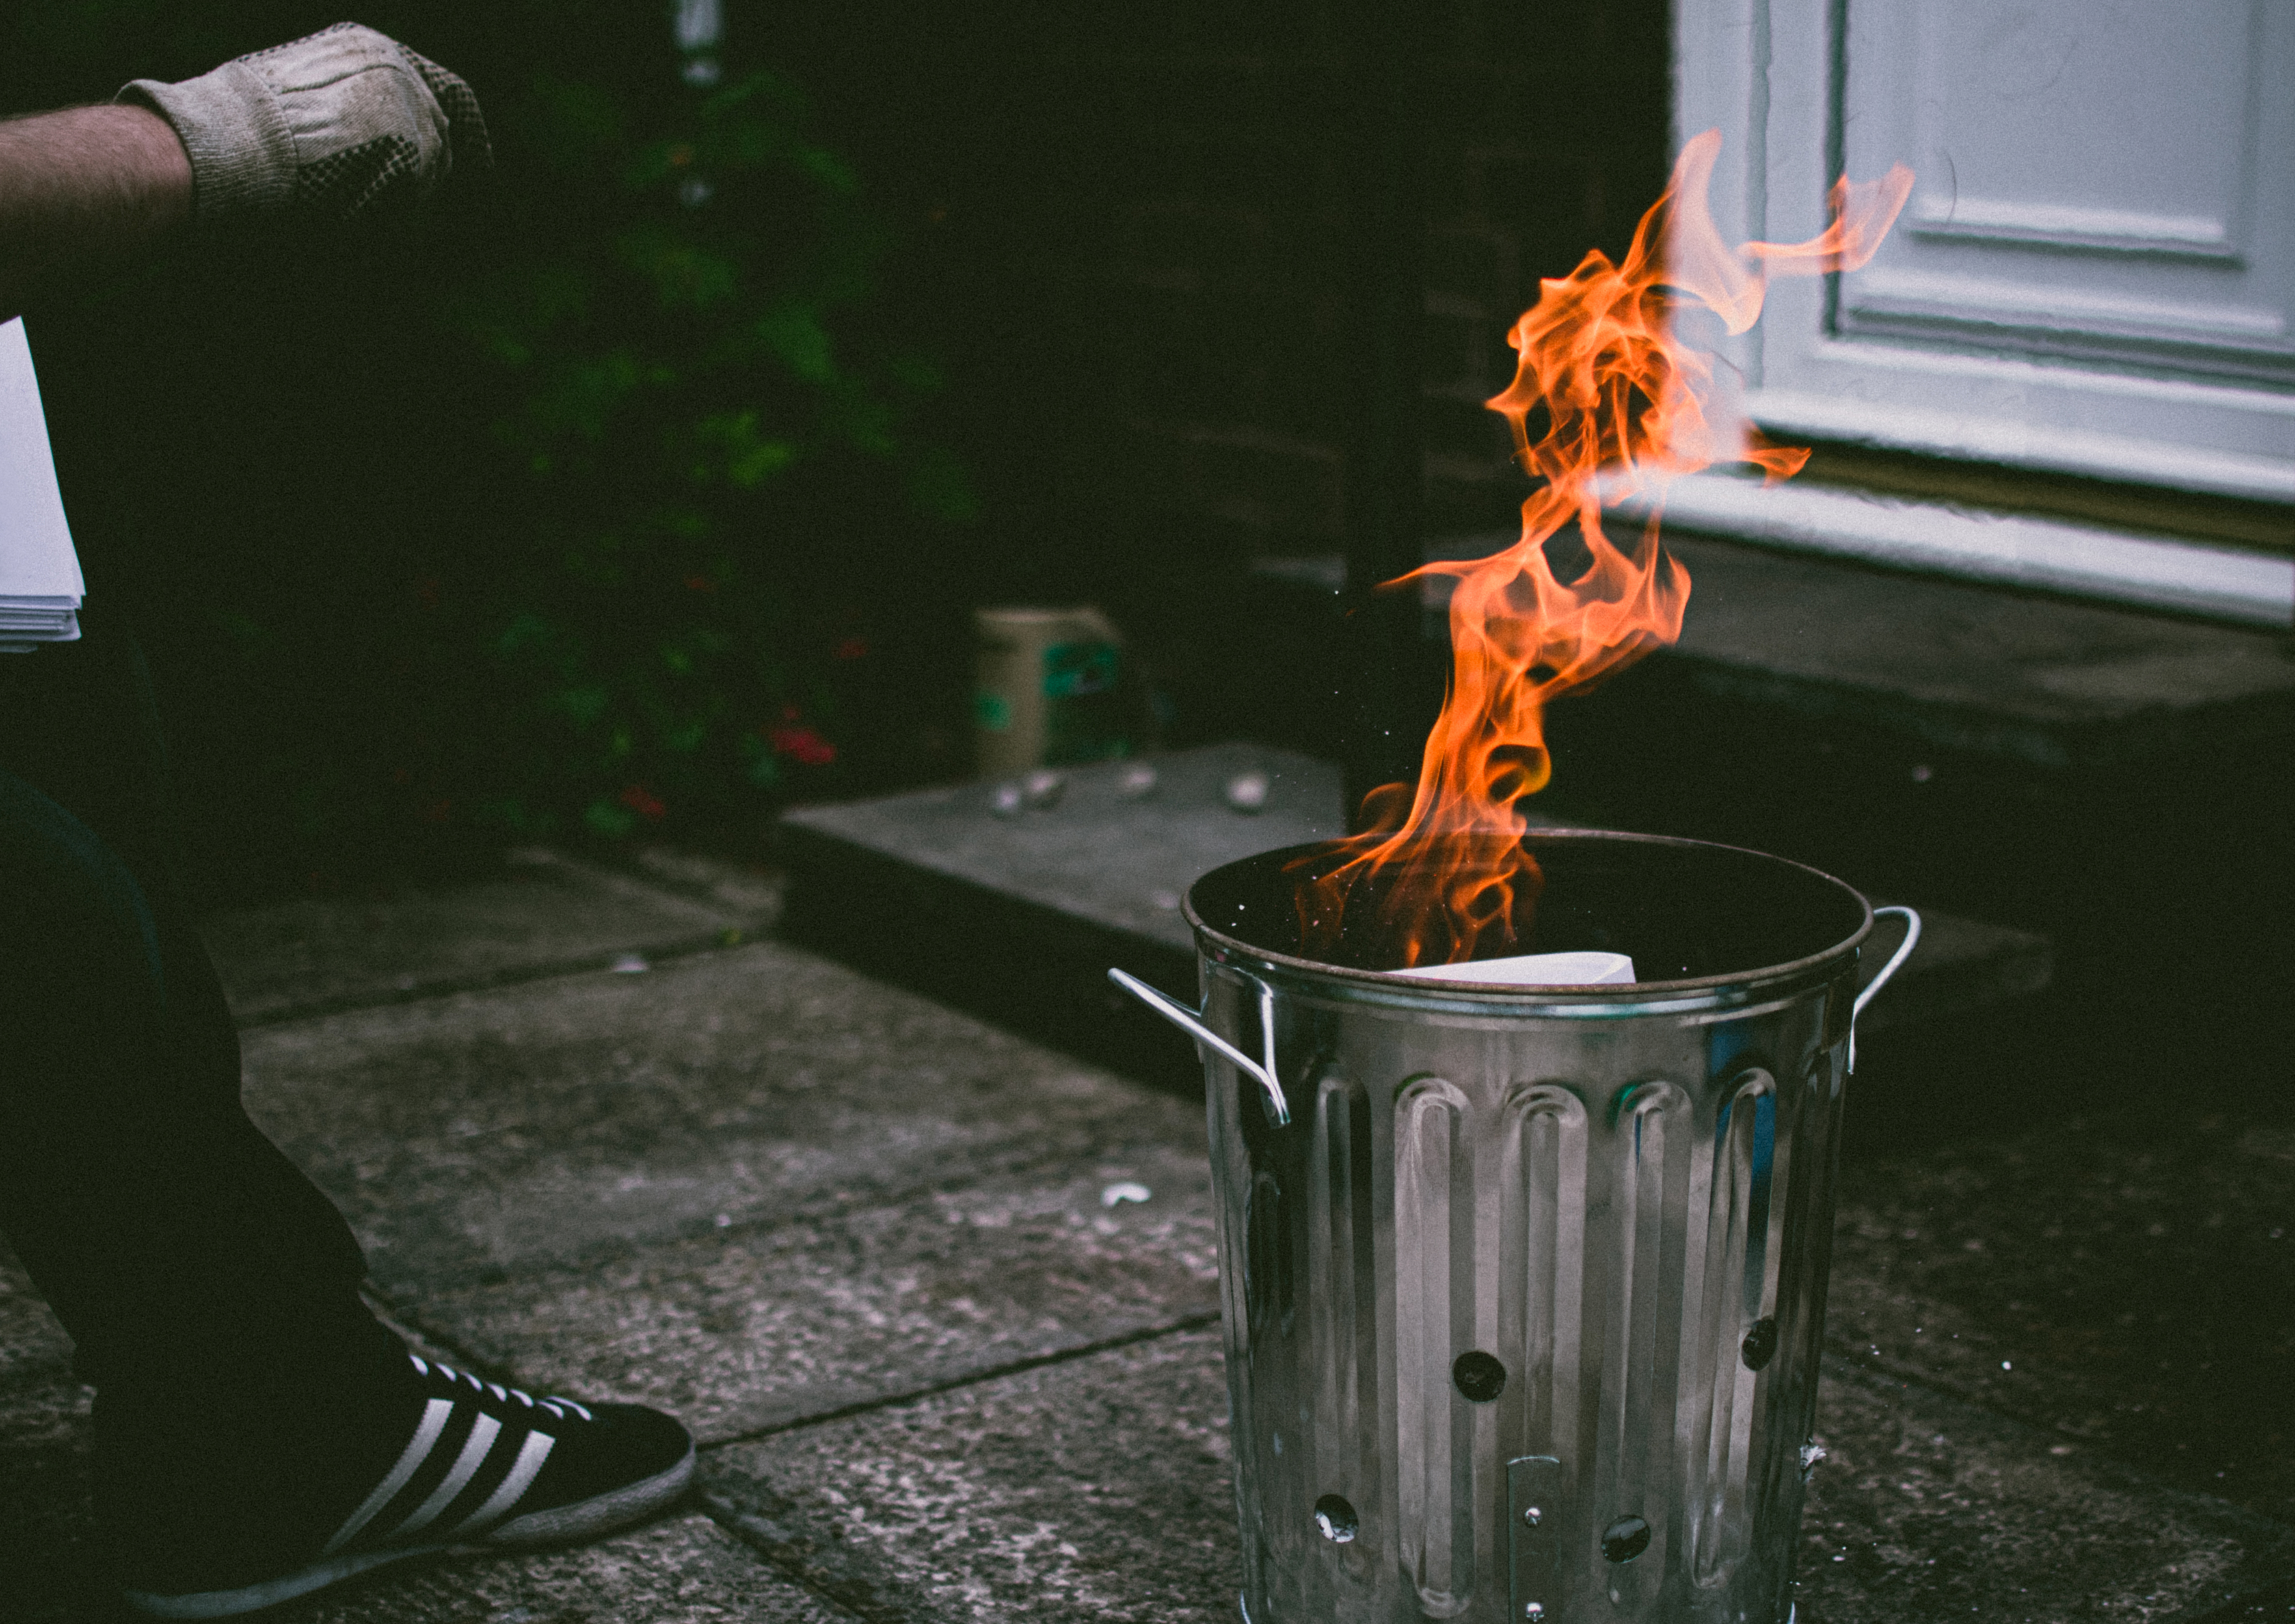 Stainless Steel Trash Can On Fire · Free